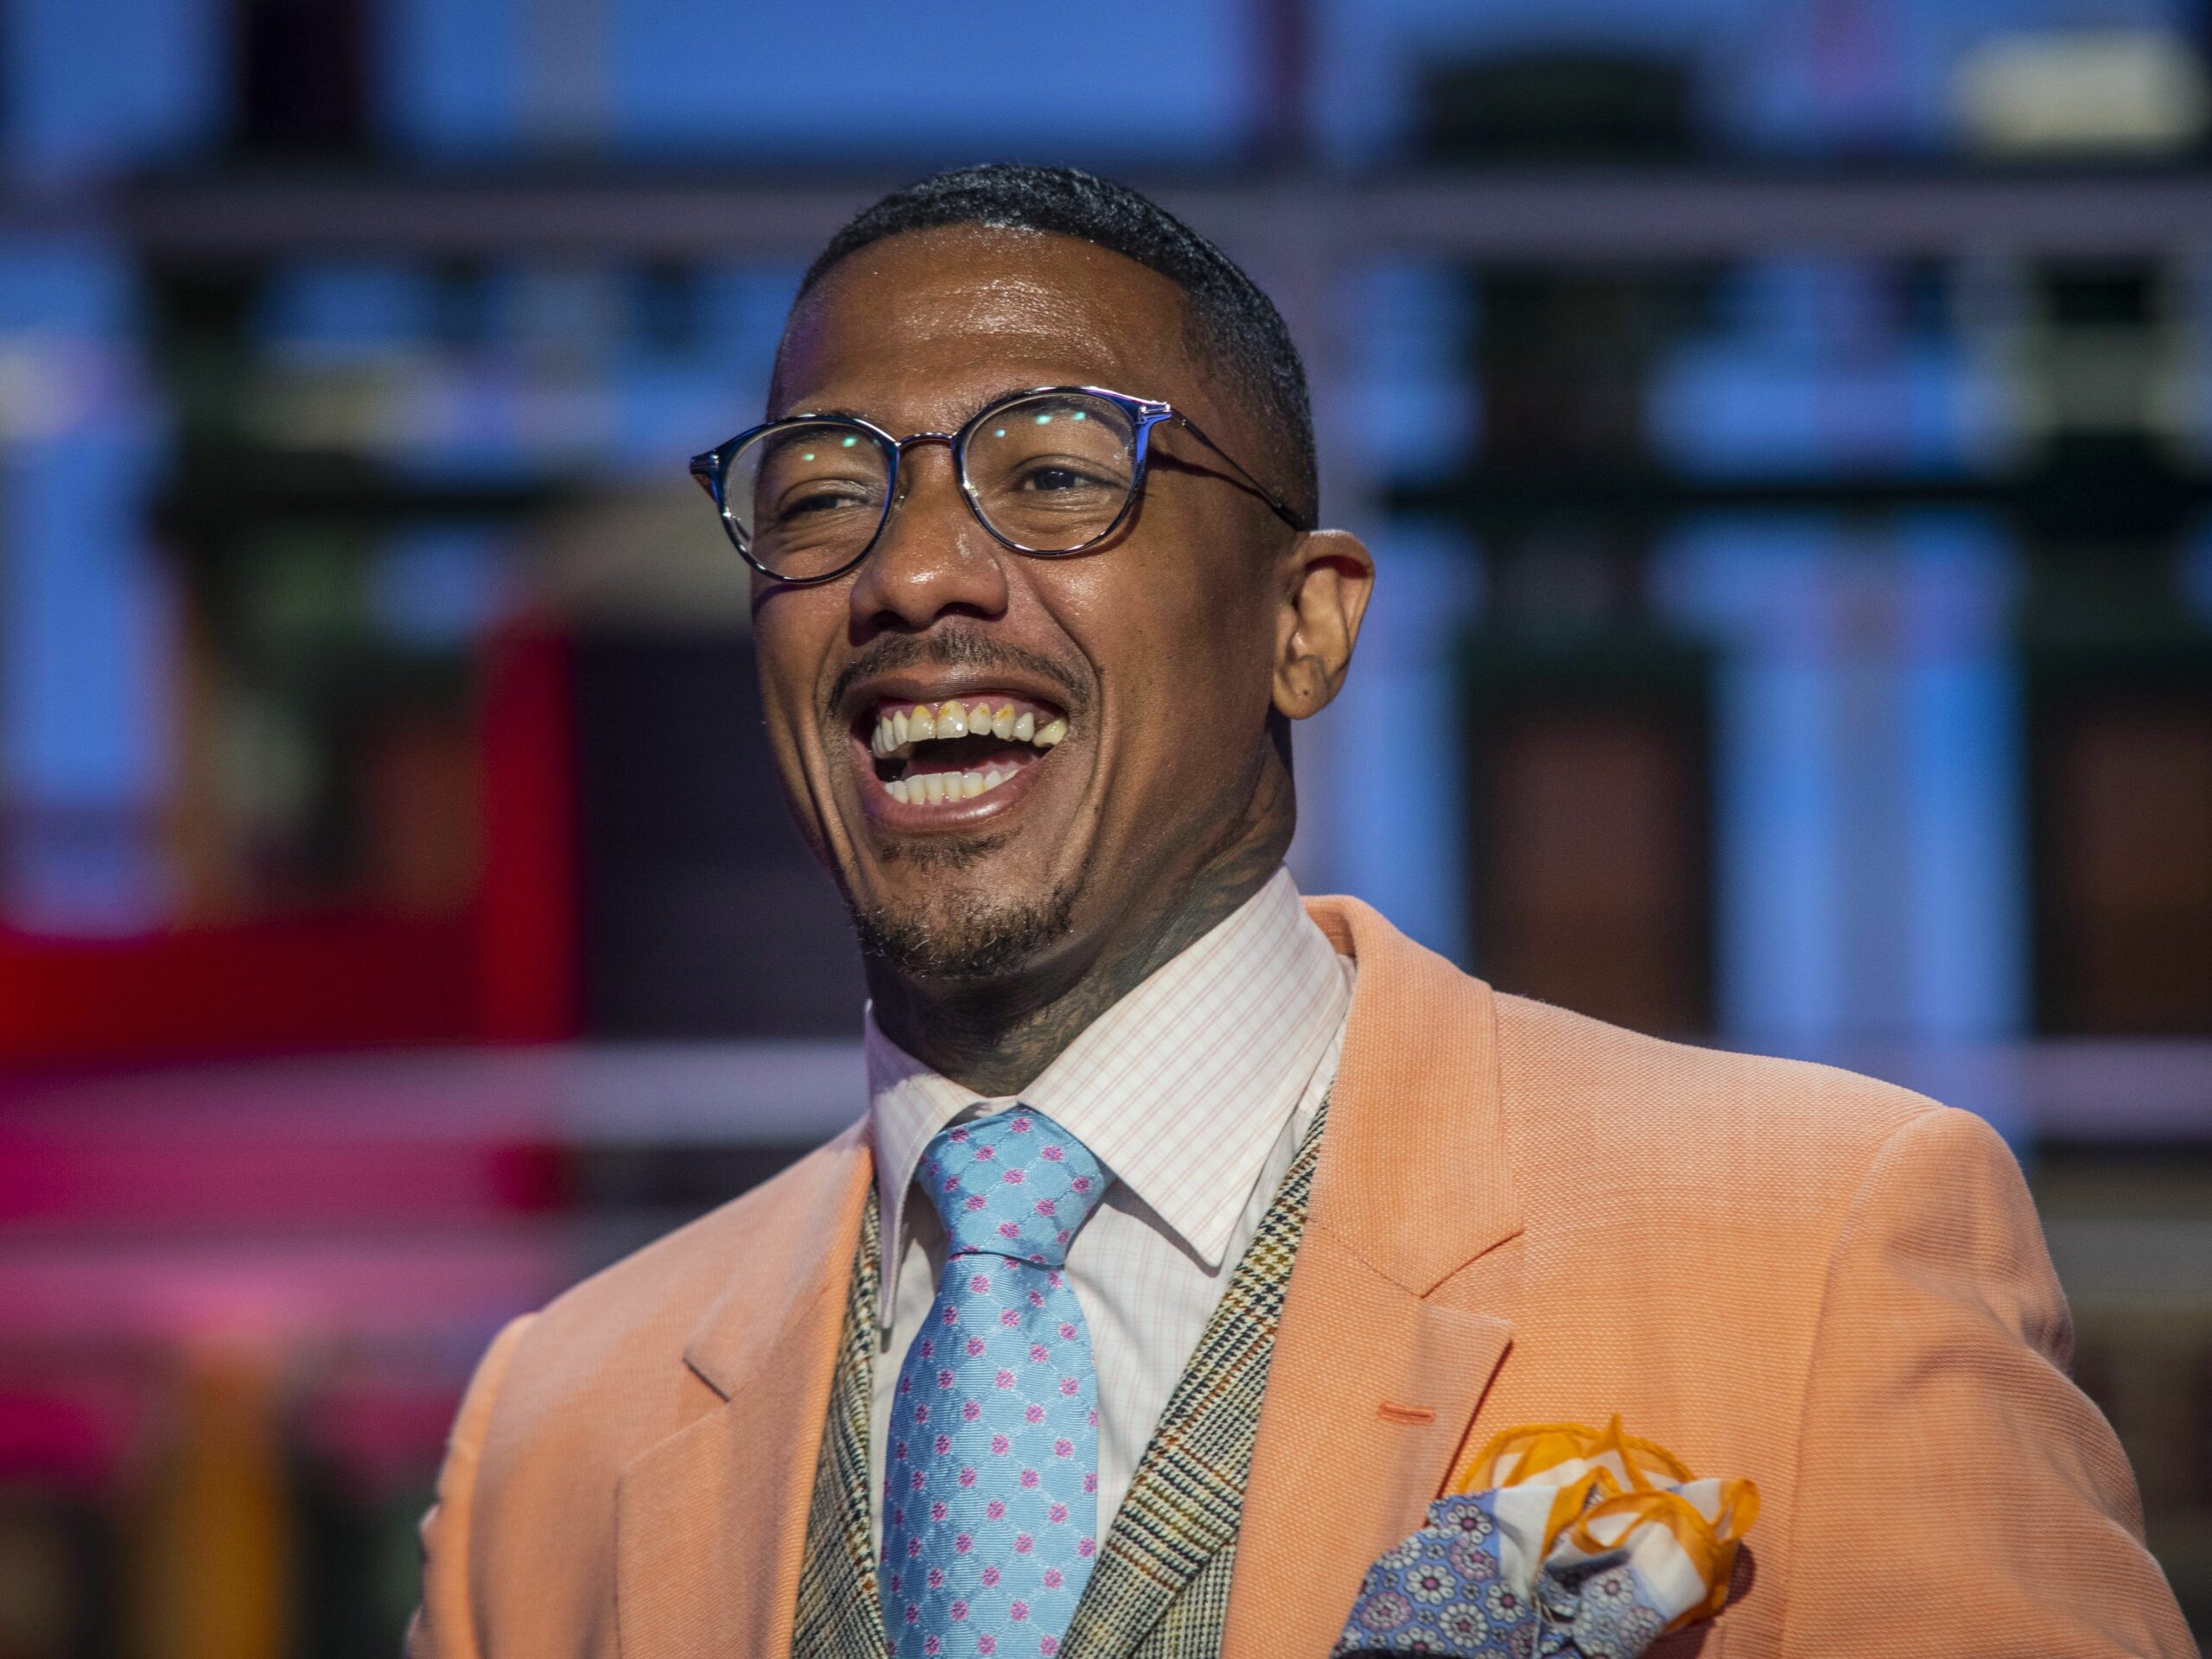 While growing family makes headlines, Nick Cannon quietly makes ‘$100m a year’